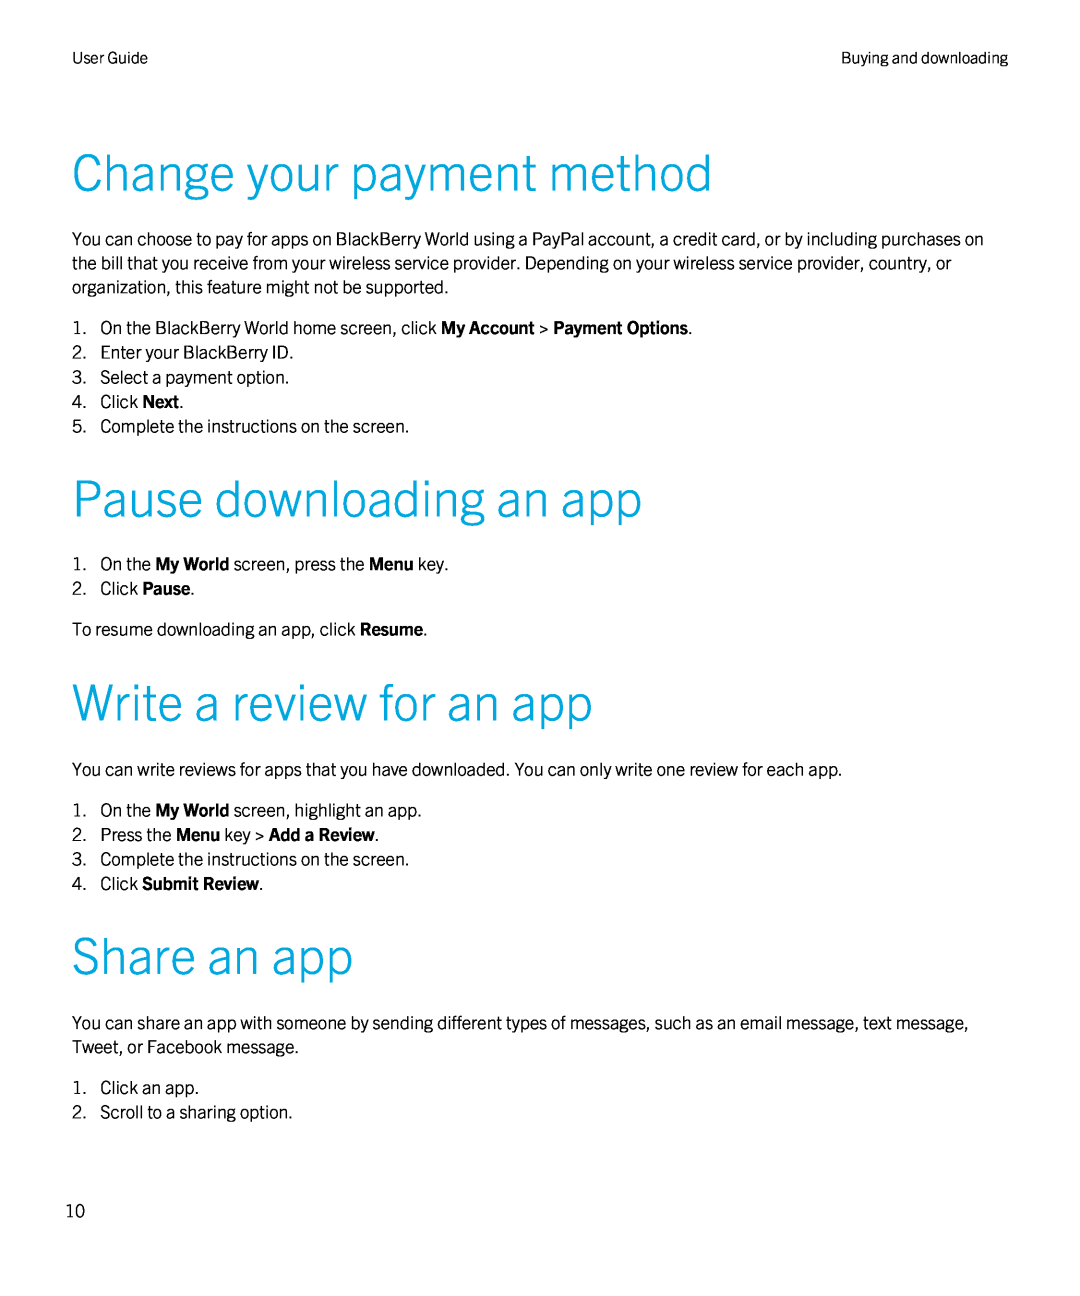 Blackberry 4.3 manual Change your payment method, Pause downloading an app, Write a review for an app, Share an app 